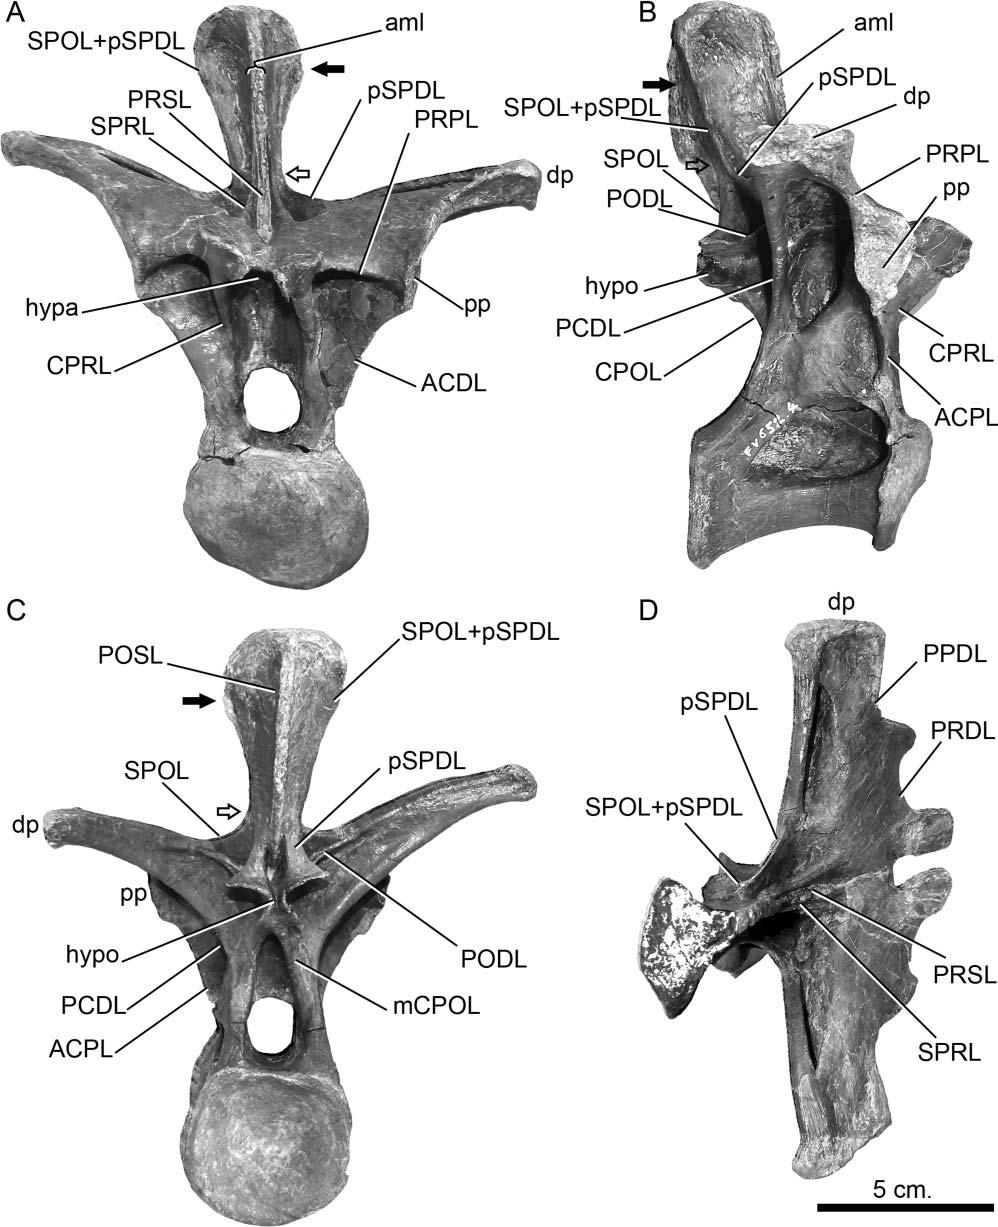 Postcranial axial skeleton of Europasaurus holgeri 31 Figure 22. Europasaurus holgeri, posterior dorsal vertebra (DFMMh/FV 652.4) in A, anterior, B, lateral, C, posterior and D, dorsal views.